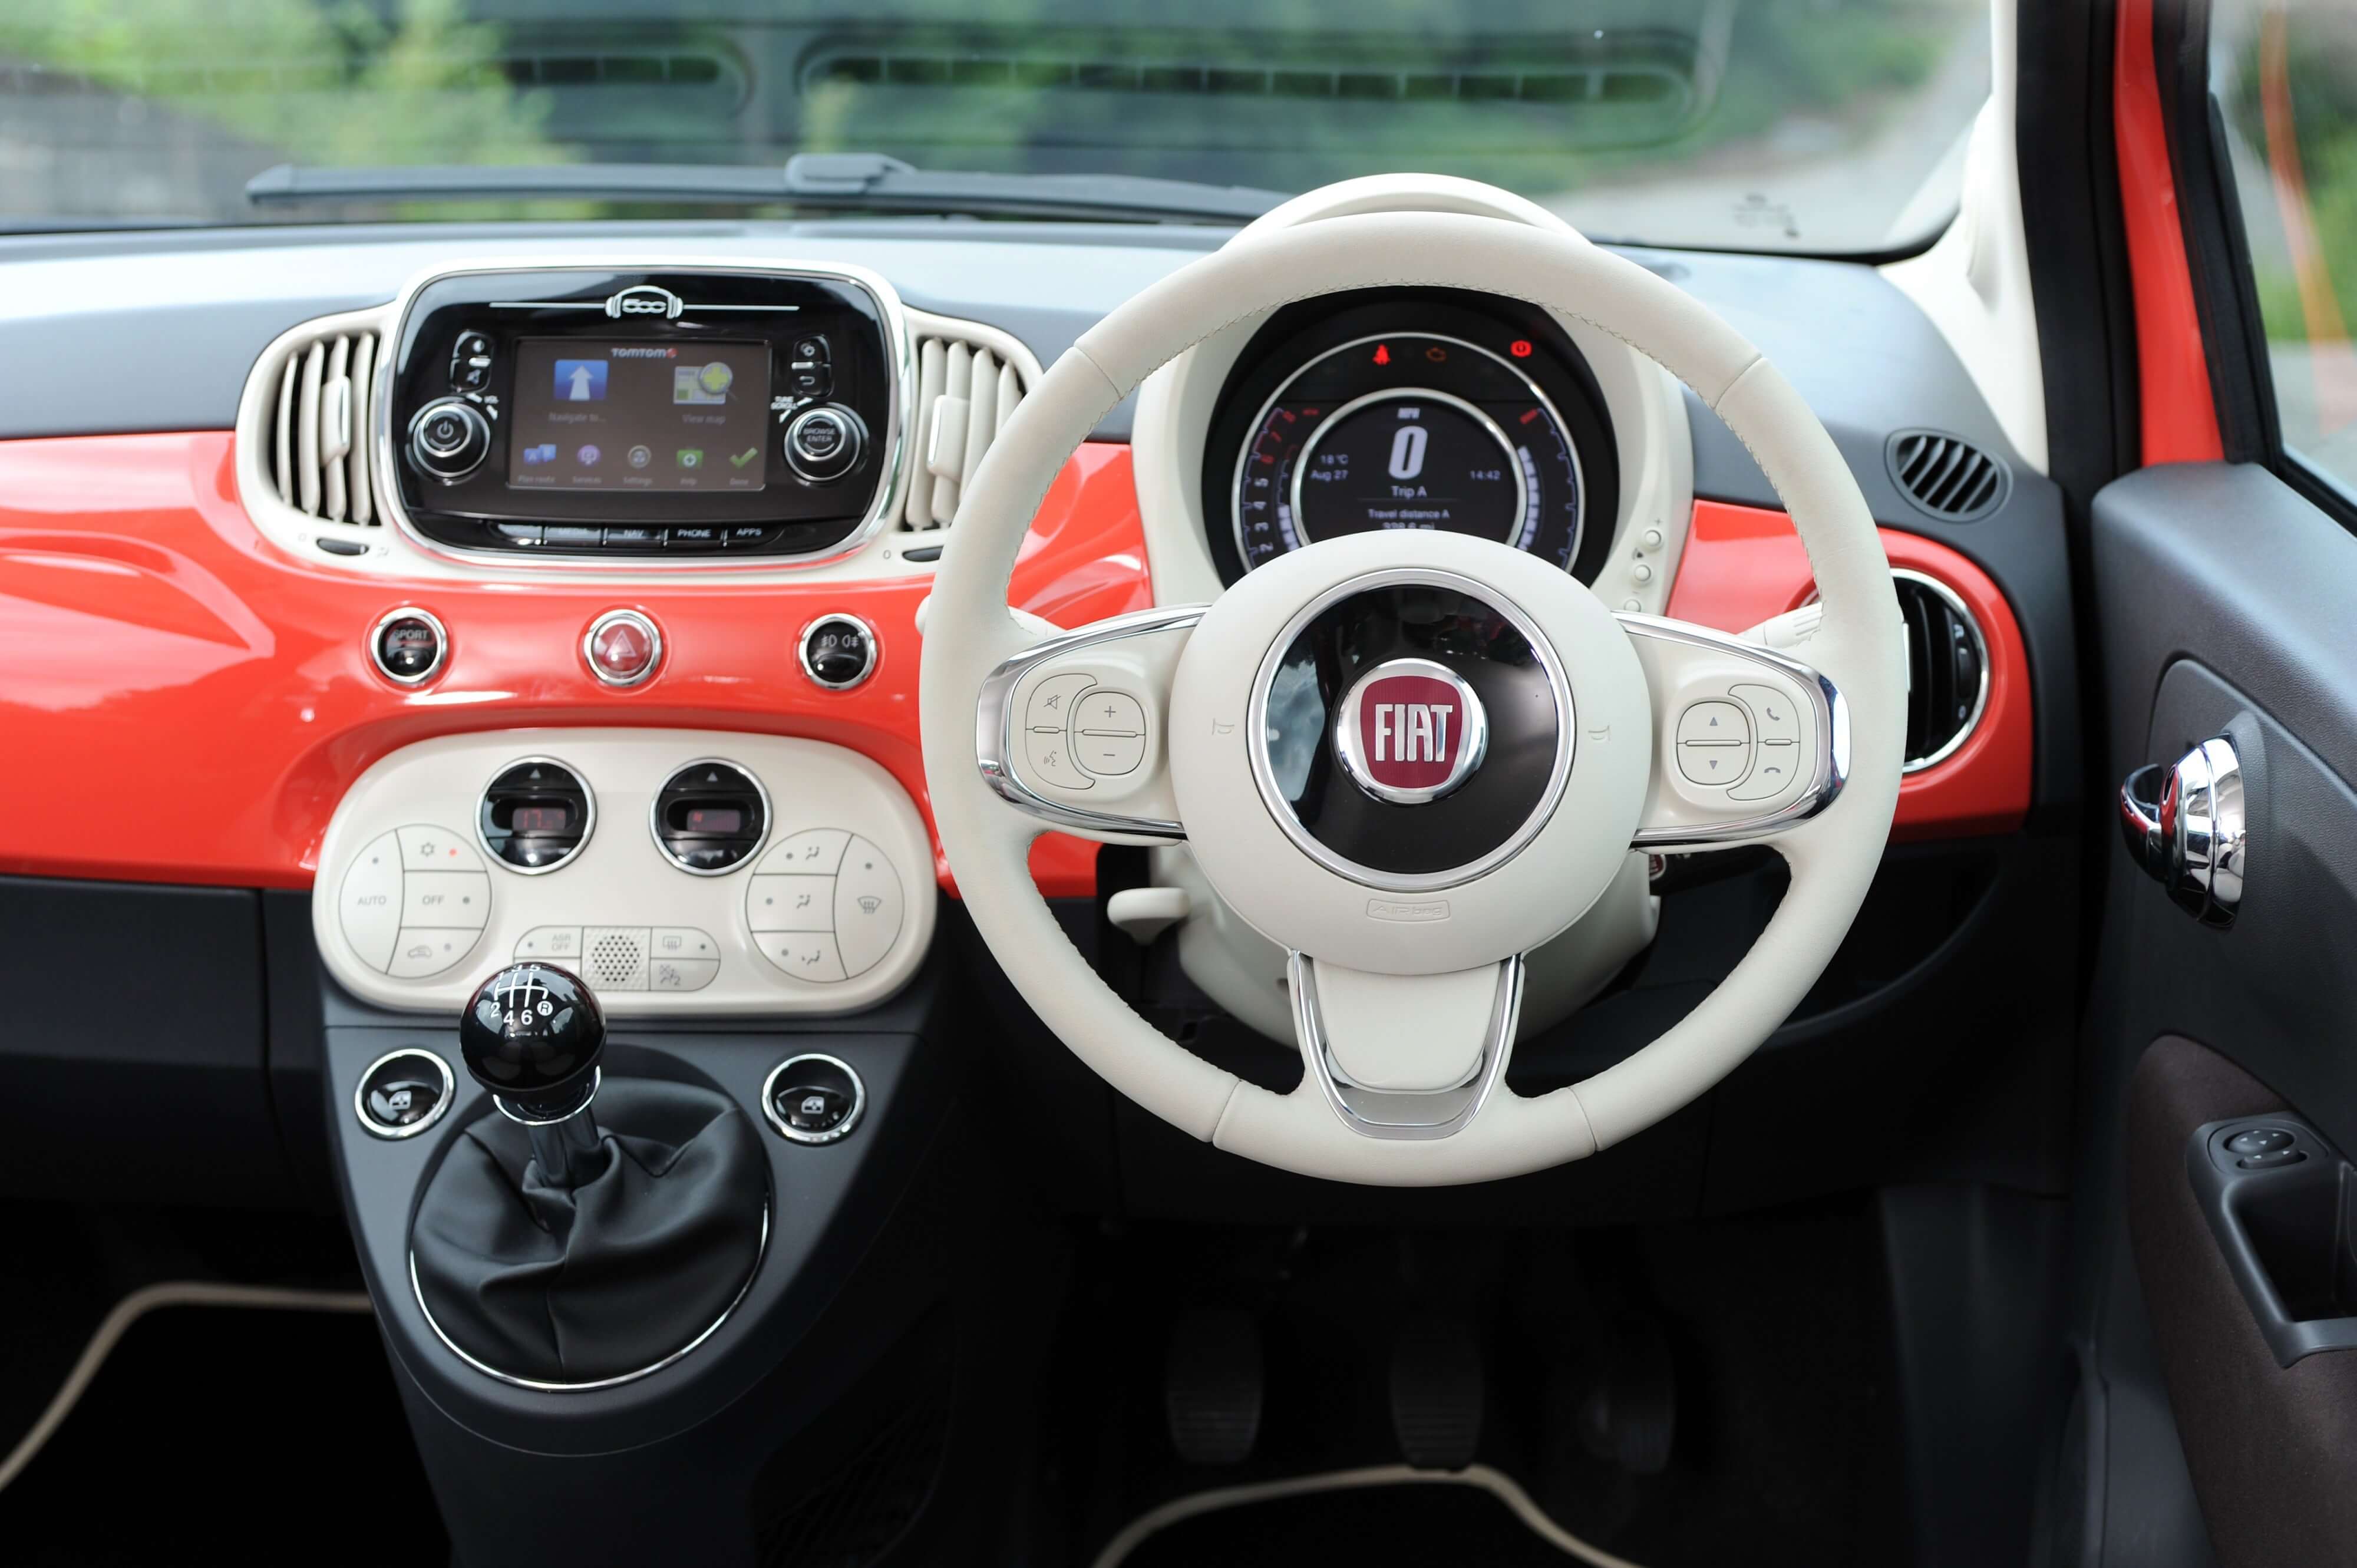 Fiat 500 Convertible Review | Carzone New Car Review